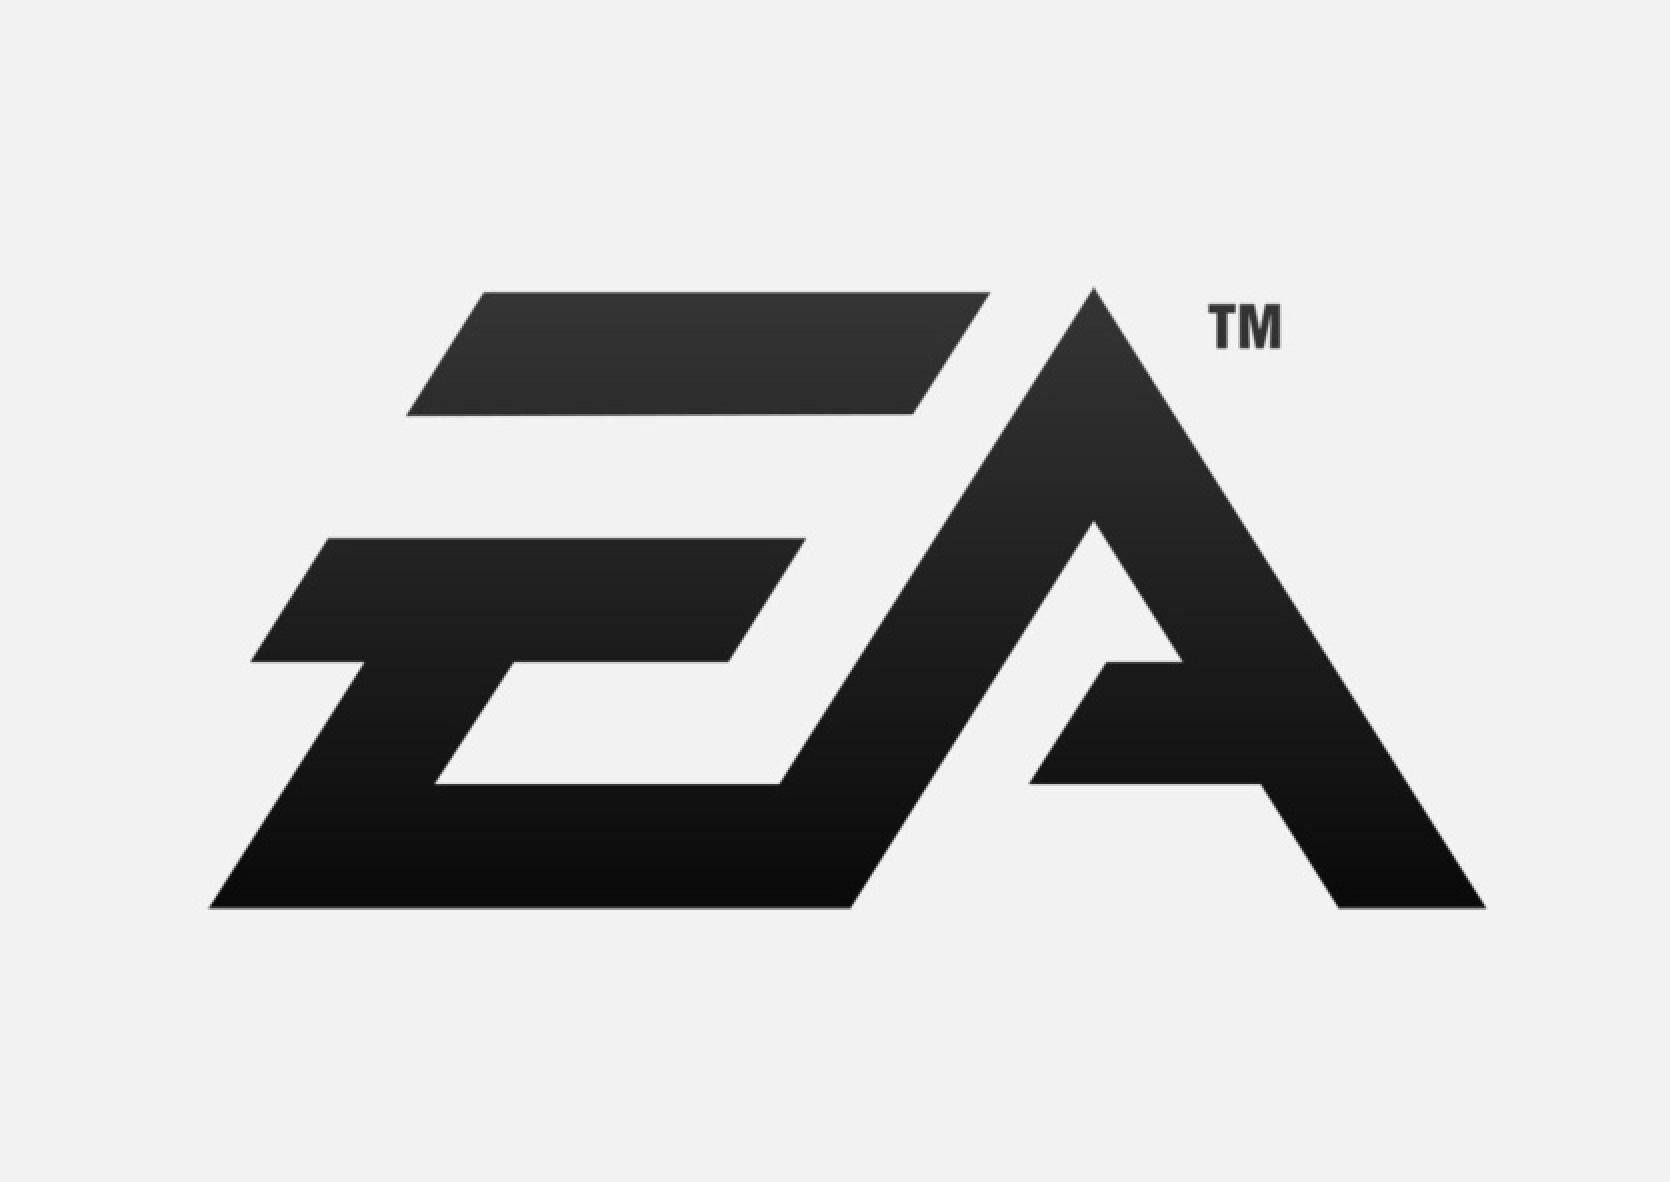 EA will lay off 670 employees (5% of staff), close Ridgeline Games studio. Respawn's Mandalorian game is all.